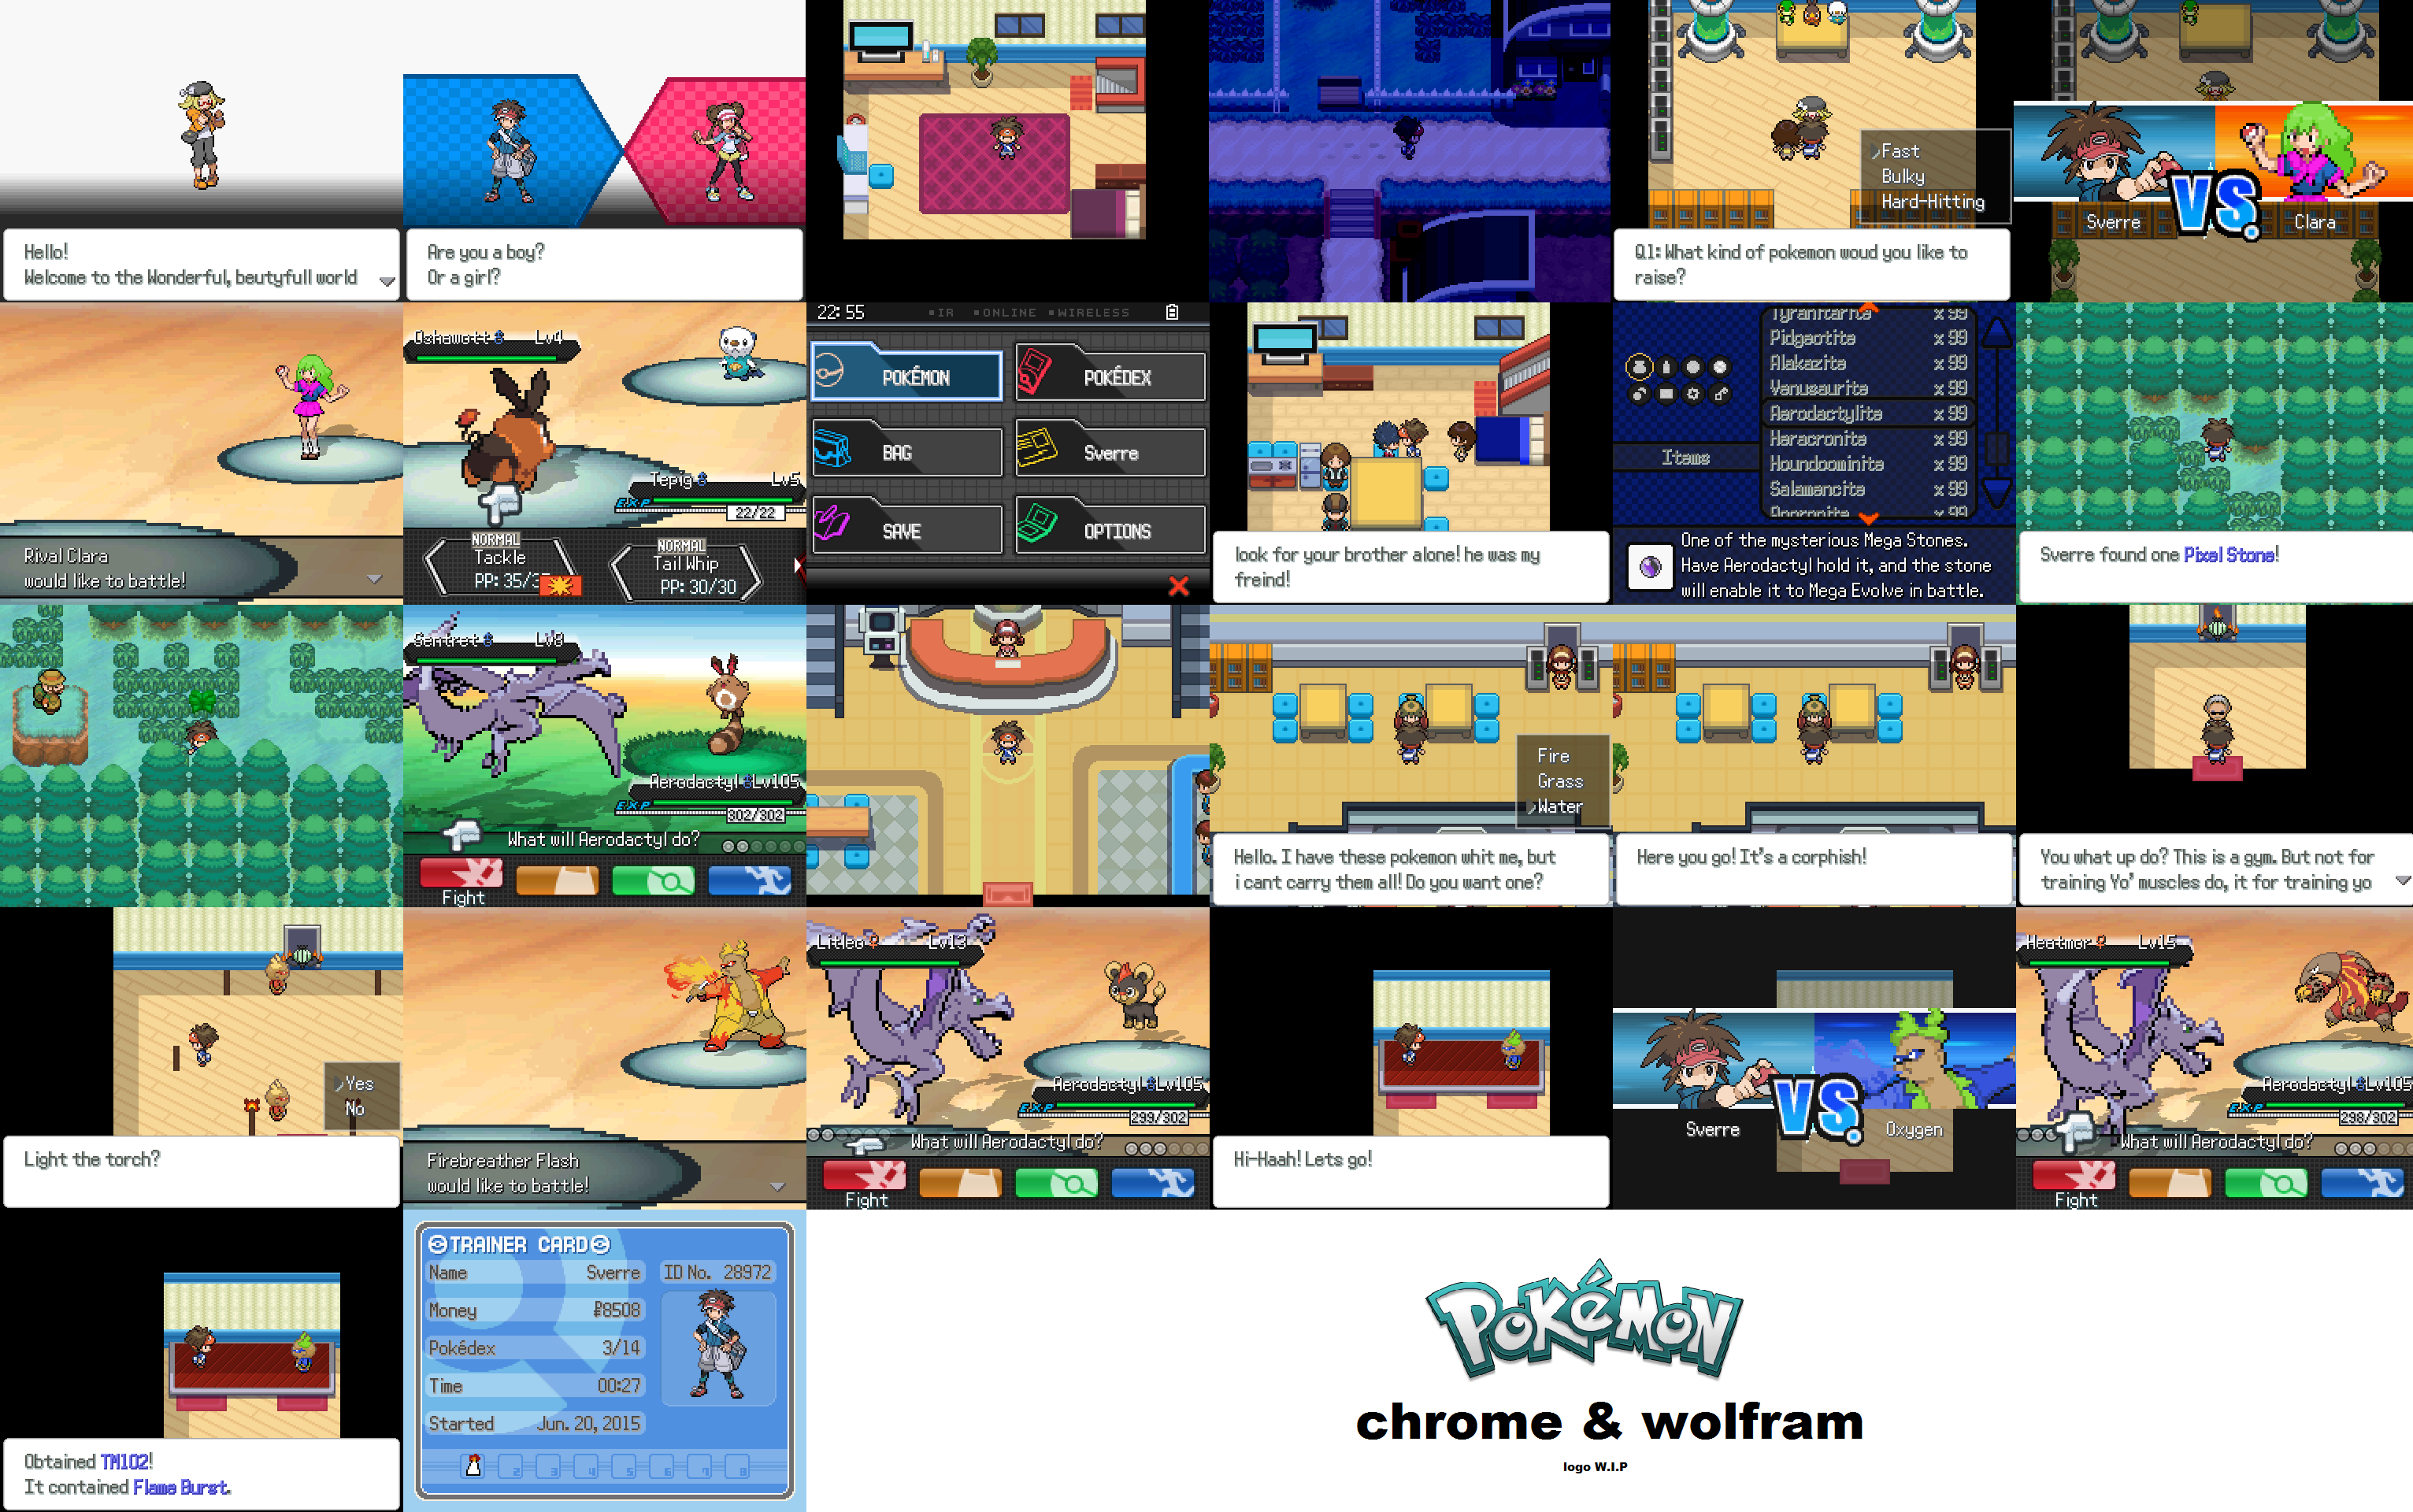 screenshot_compilation_pokemon_chrome_and_wolfram_by_sverre712-d8y51et.png